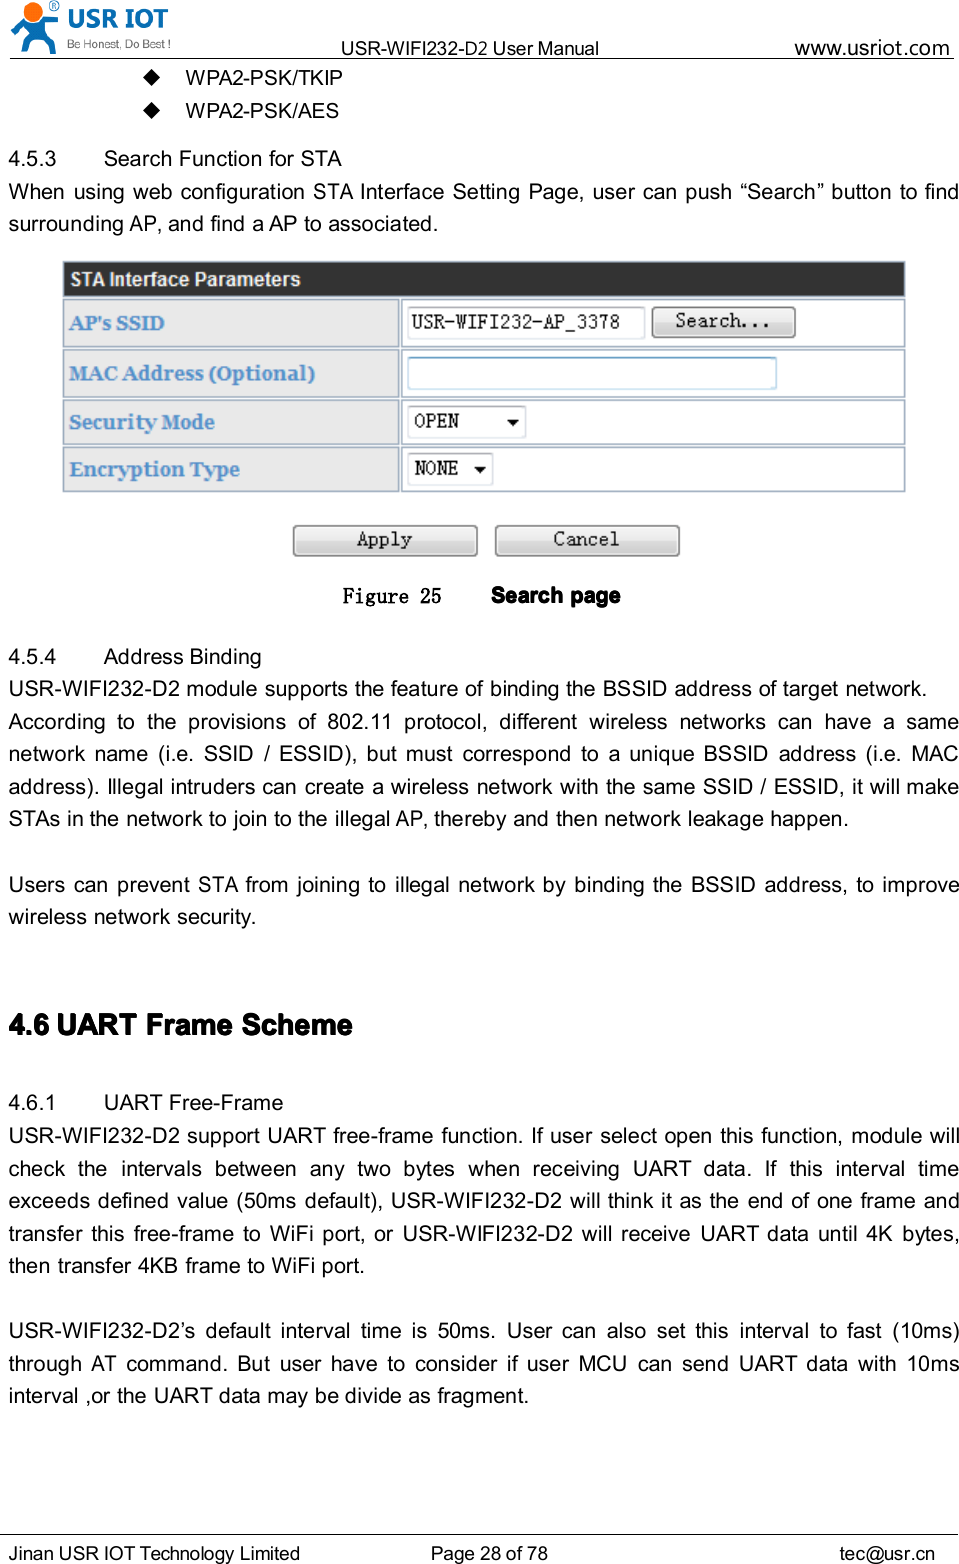 USR-WIFI232- D2 User Manual www.usr iot .comJinan USR IOT Technology Limited Page 28 of 78 tec@usr.cnWPA2-PSK/TKIPWPA2-PSK/AES4.5.3 Search Function for STAWhen using web configurationSTAInterface Setting Page, user can push “ Search ” button to findsurroundingAP,and find a AP to associated.Figure 25 SearchSearchSearchSearch pagepagepagepage4.5.4 Address BindingUSR-WIFI232-D2 module supports the feature of binding the BSSID address of target network.According to the provisions of 802.11 protocol, different wireless networks can have a samenetwork name (i.e. SSID / ESSID), but must correspond to a unique BSSID address (i.e. MACaddress). Illegal intruders can create a wireless network with the same SSID / ESSID, it will makeSTAs in the network to join to the illegalAP,thereby and then network leakage happen.Users can preventSTAfrom joining to illegal network by binding the BSSID address, to improvewireless network security.4.64.64.64.6 UARTUARTUARTUART FrameFrameFrameFrame SchemeSchemeSchemeScheme4.6.1 UART Free-FrameUSR-WIFI232-D2 support UART free-frame function. If user select open this function, module willcheck the intervals between any two bytes when rec ei ving UART data. If this interval timeexceeds defined value (50ms default), USR-WIFI232-D2 will think it as the end of one frame andtransfer this free-frame to WiFi port, or USR-WIFI232-D2 will receive UART data until 4K bytes,then transfer 4KB frame to WiFi port.USR-WIFI232-D2 ’ s default interval time is 50ms. User can also set this interval to fast (10ms)throughATcommand. But user have to consider if user MCU can send UART data with 10msinterval ,or the UART data may be divide as fragment.